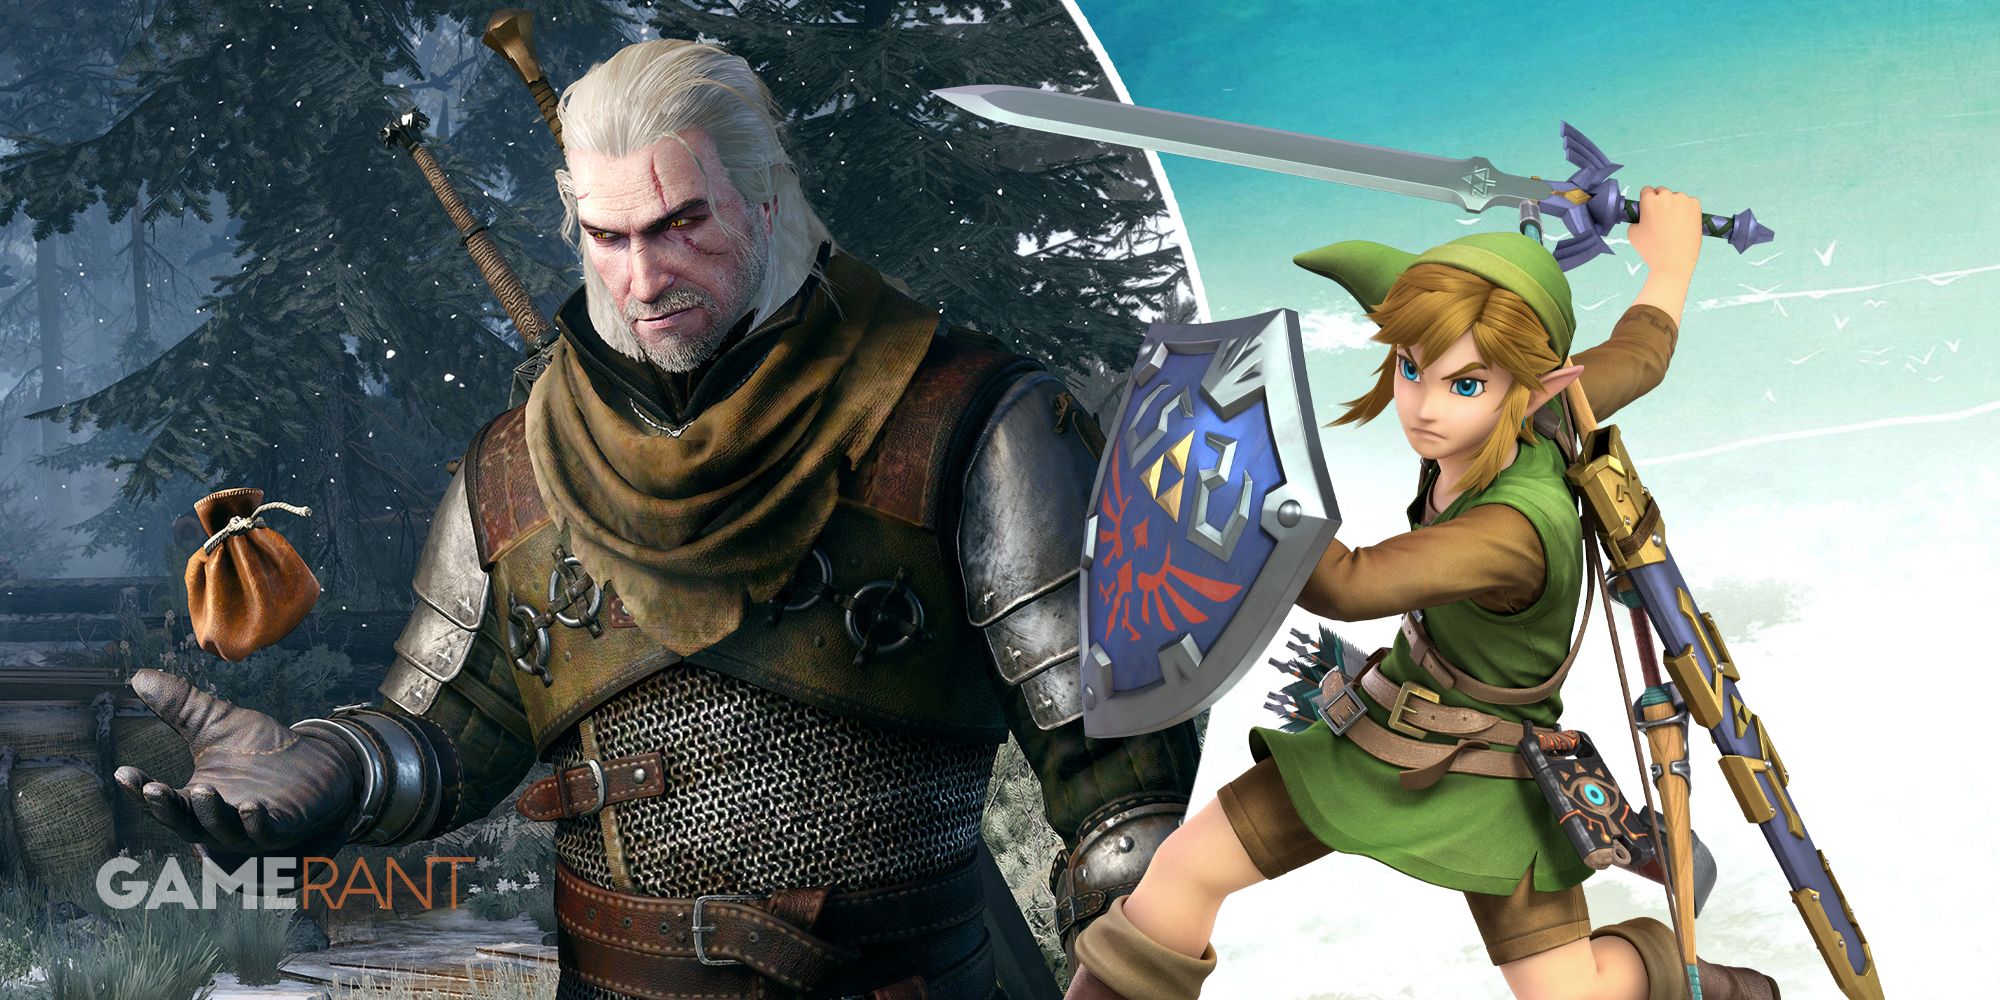 The Witcher 3 Geralt of Rivia with a bag of gold on left, The Legend of Zelda Link with sword and shield on right